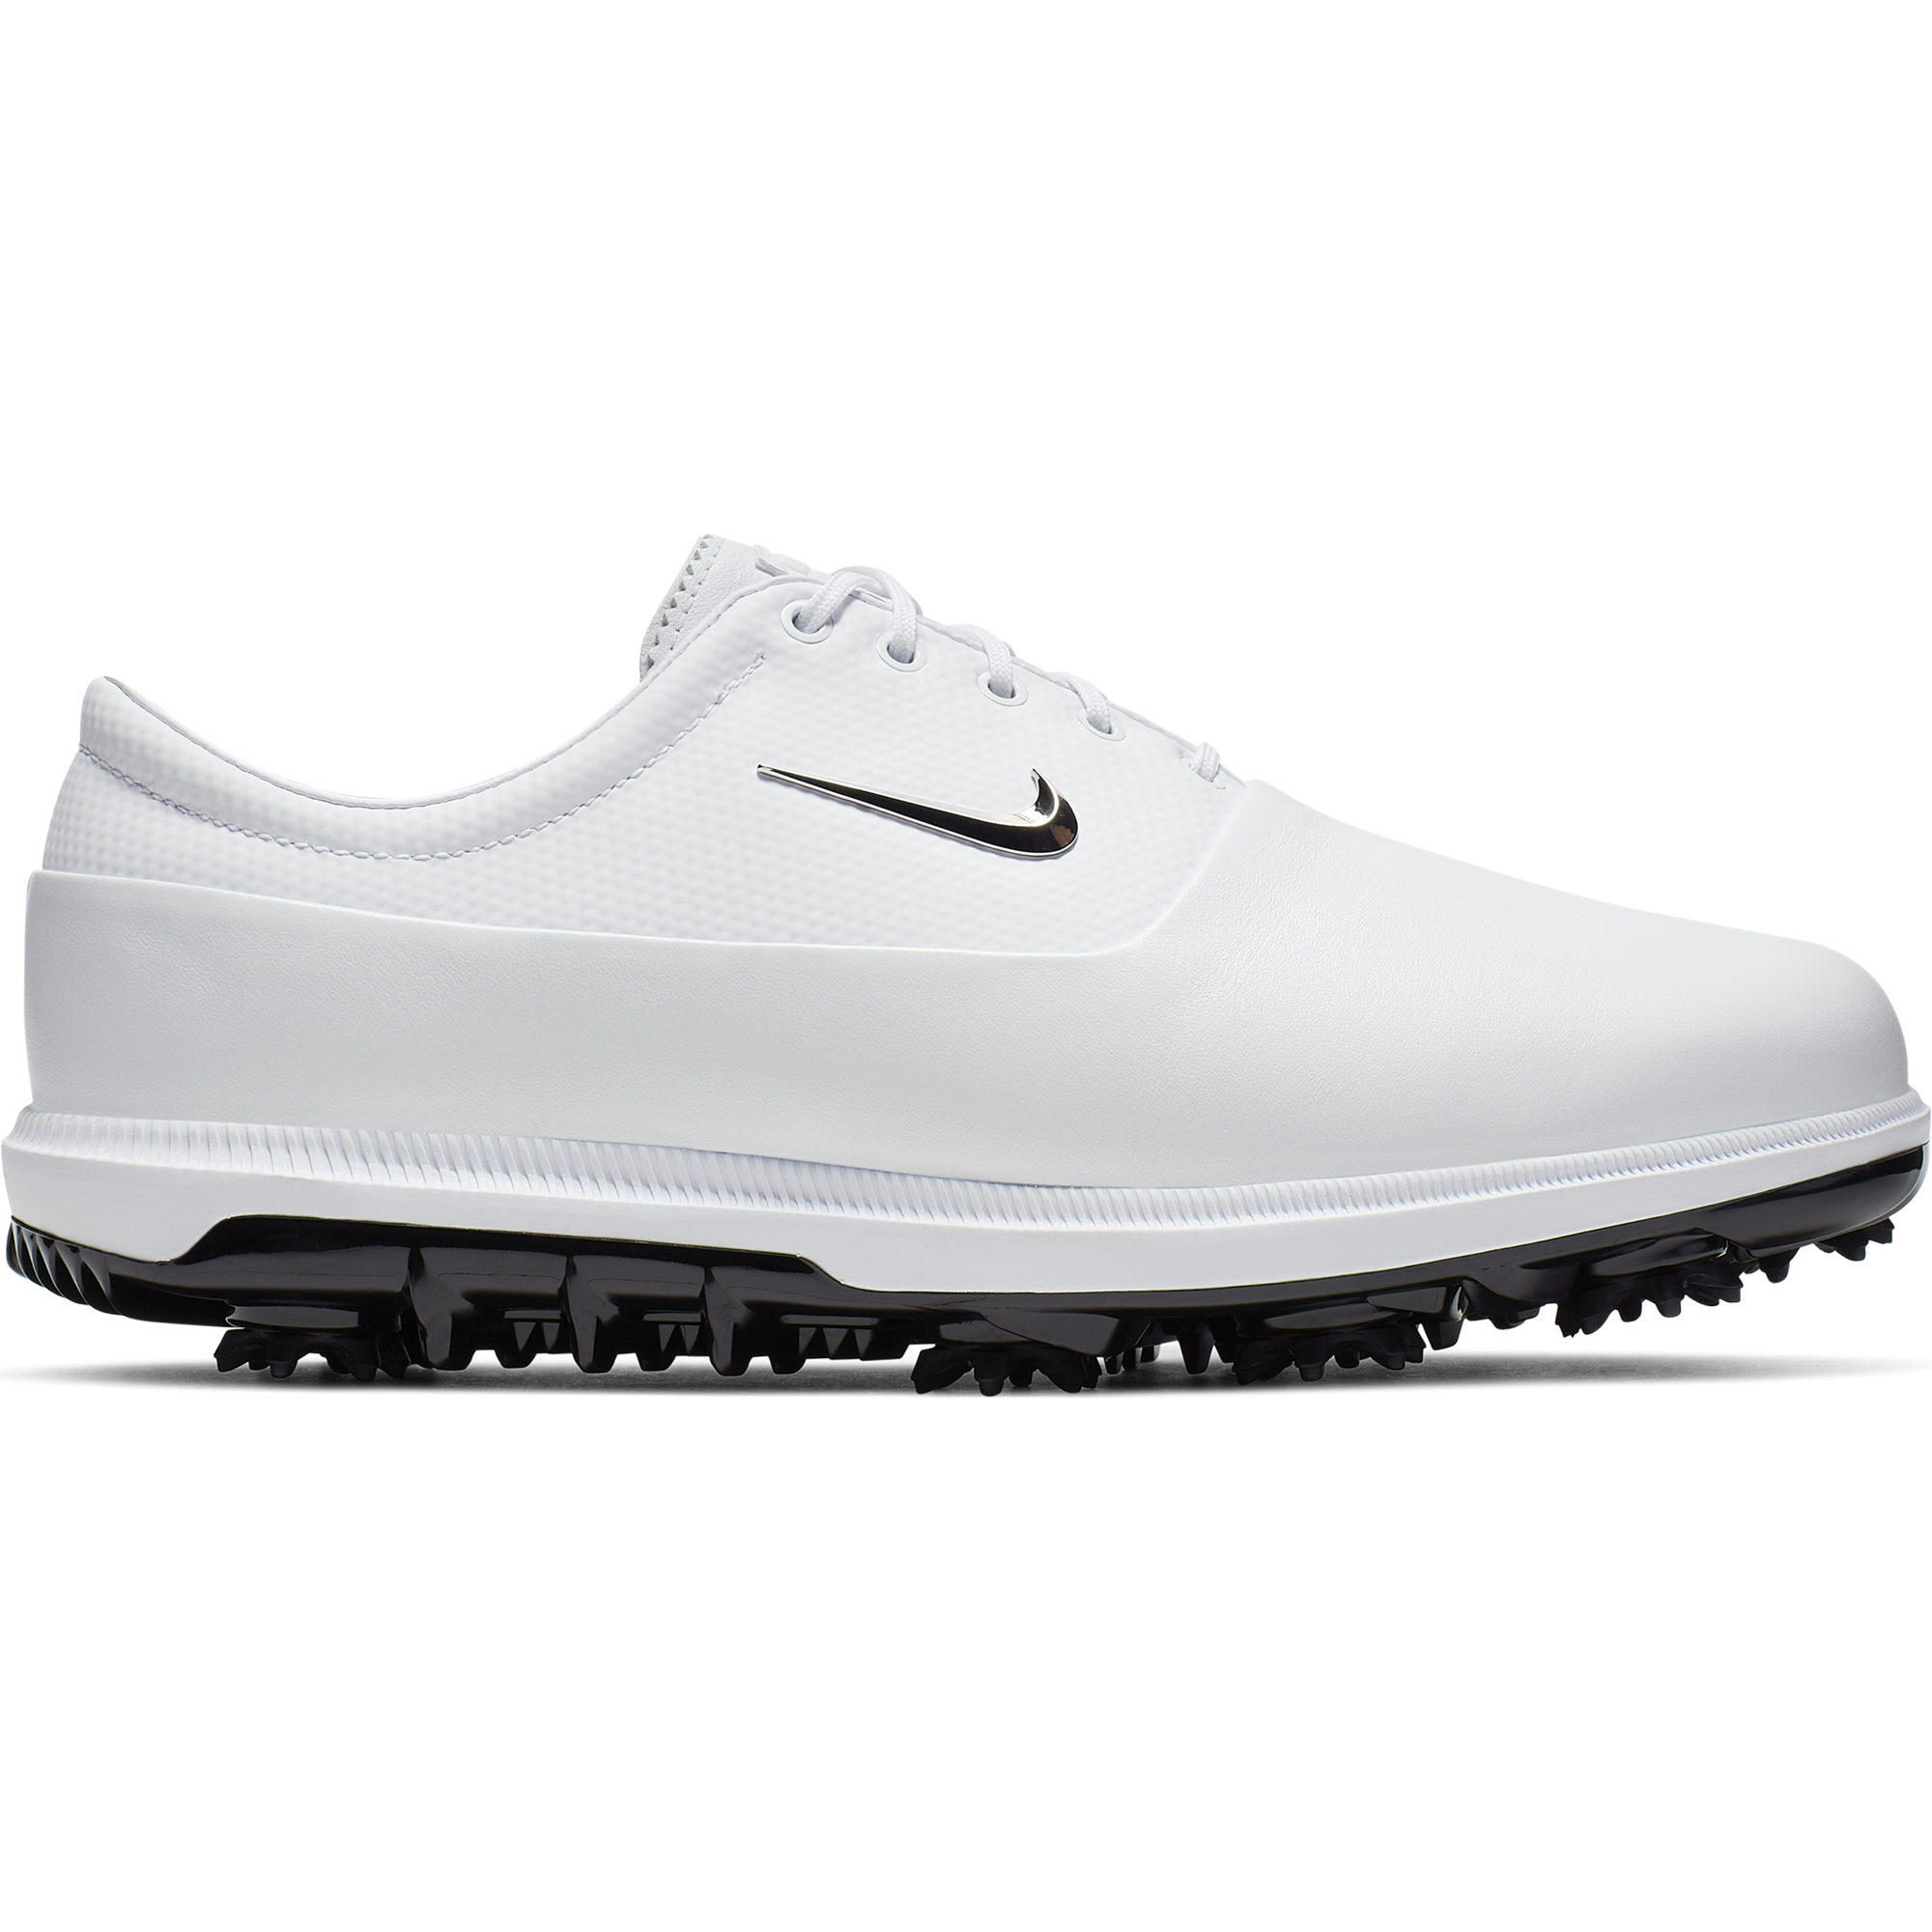 nike women's air zoom victory golf shoes